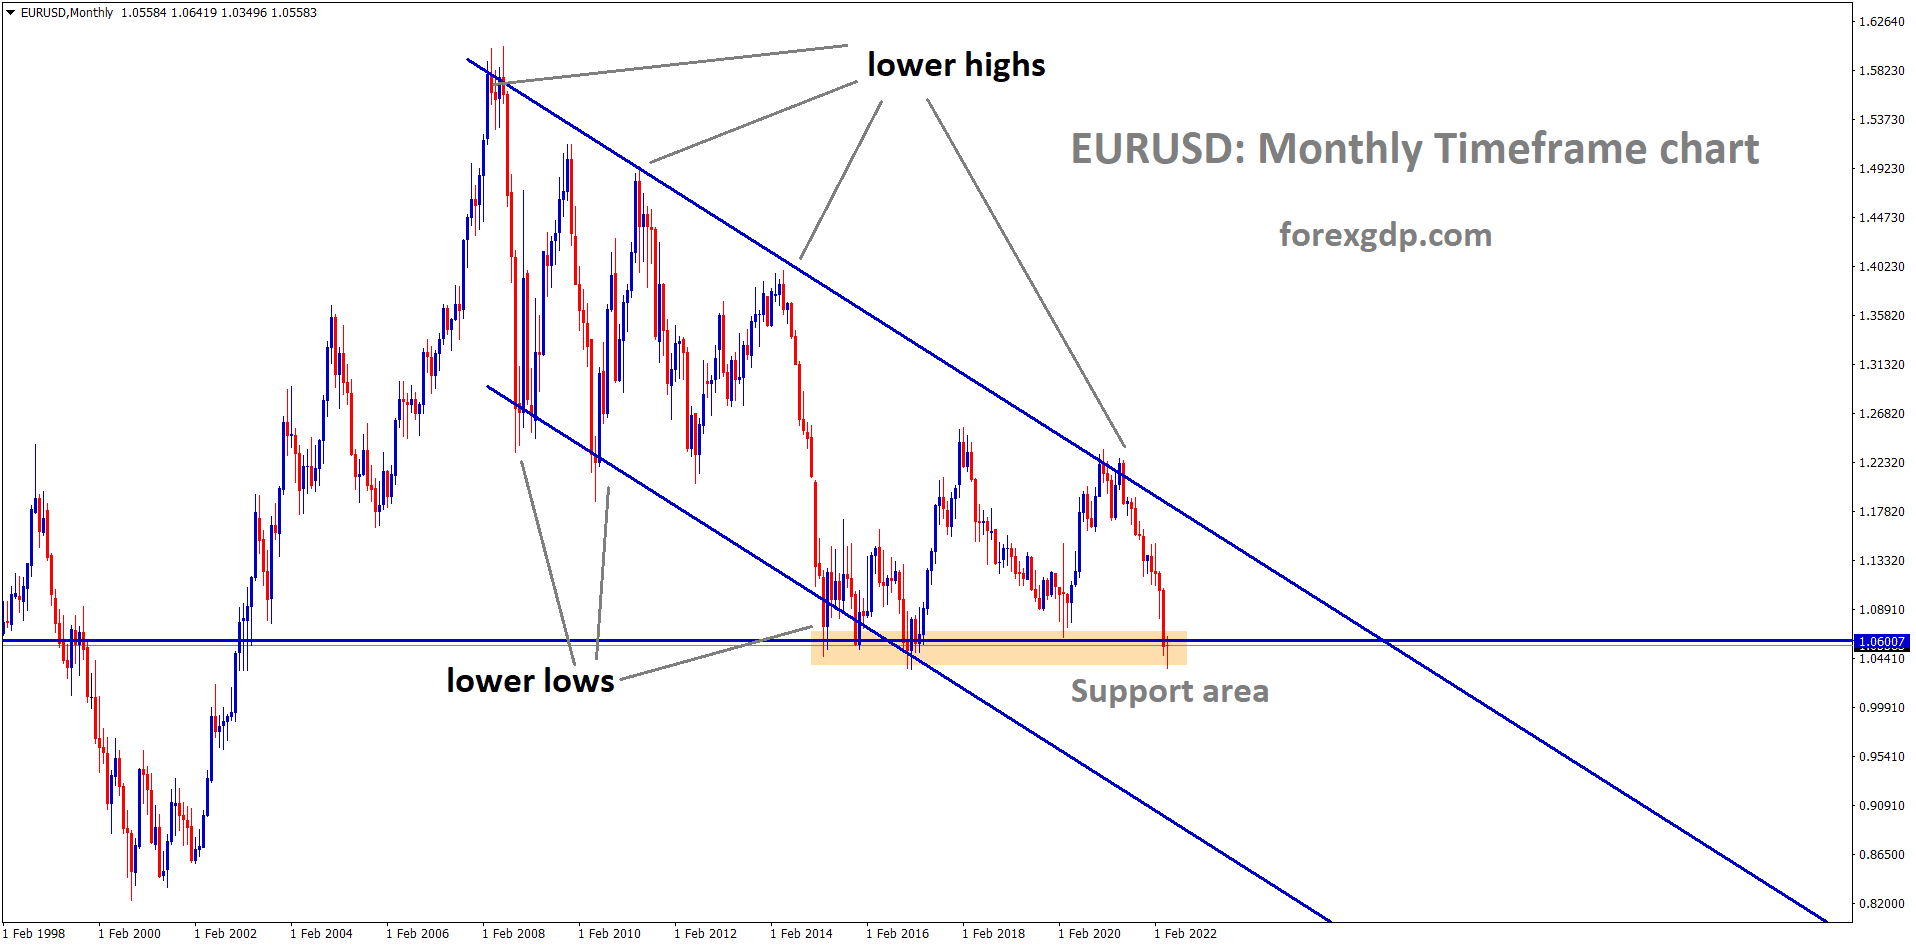 EURUSD monthly time frame is showing a downtrend